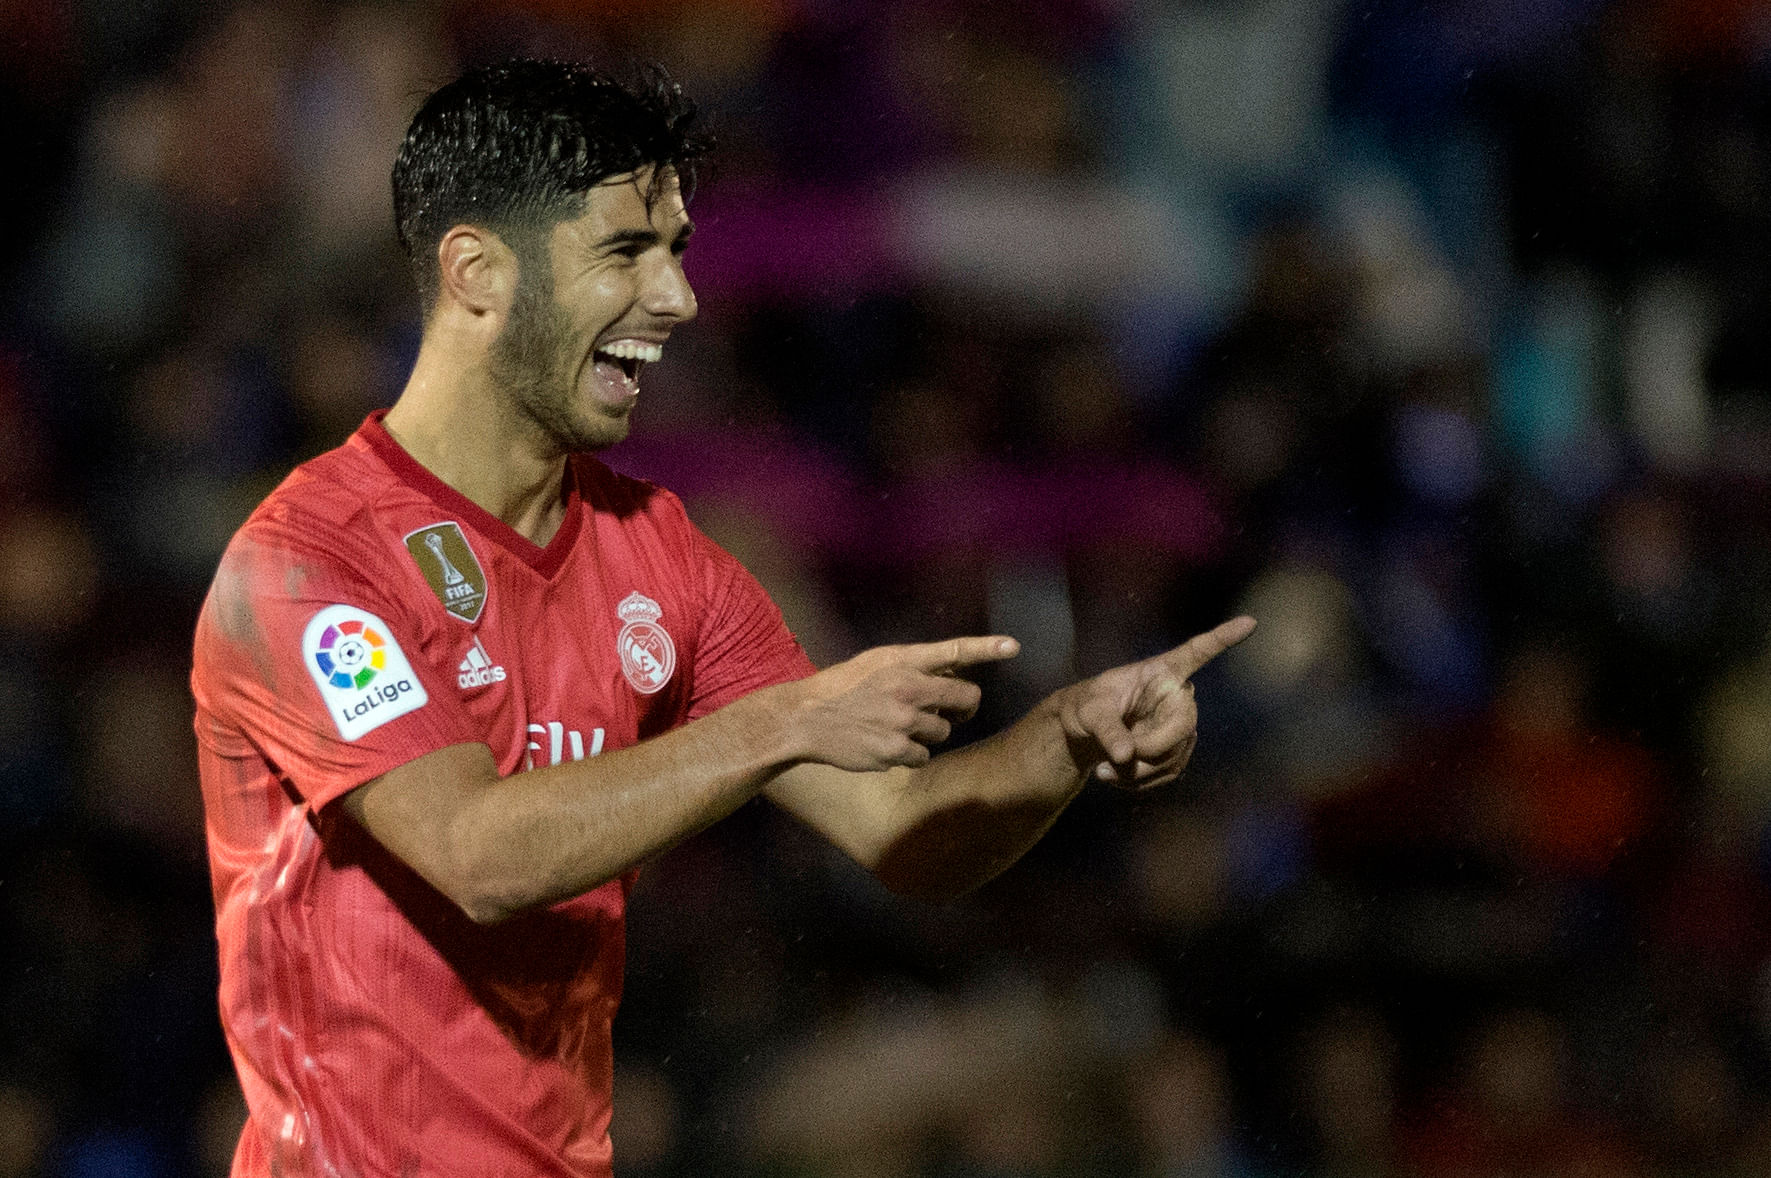 Real Madrid's Marco Asensio celebrates after scoring against Melilla during their Cop del Rey game on Wednesday. AFP